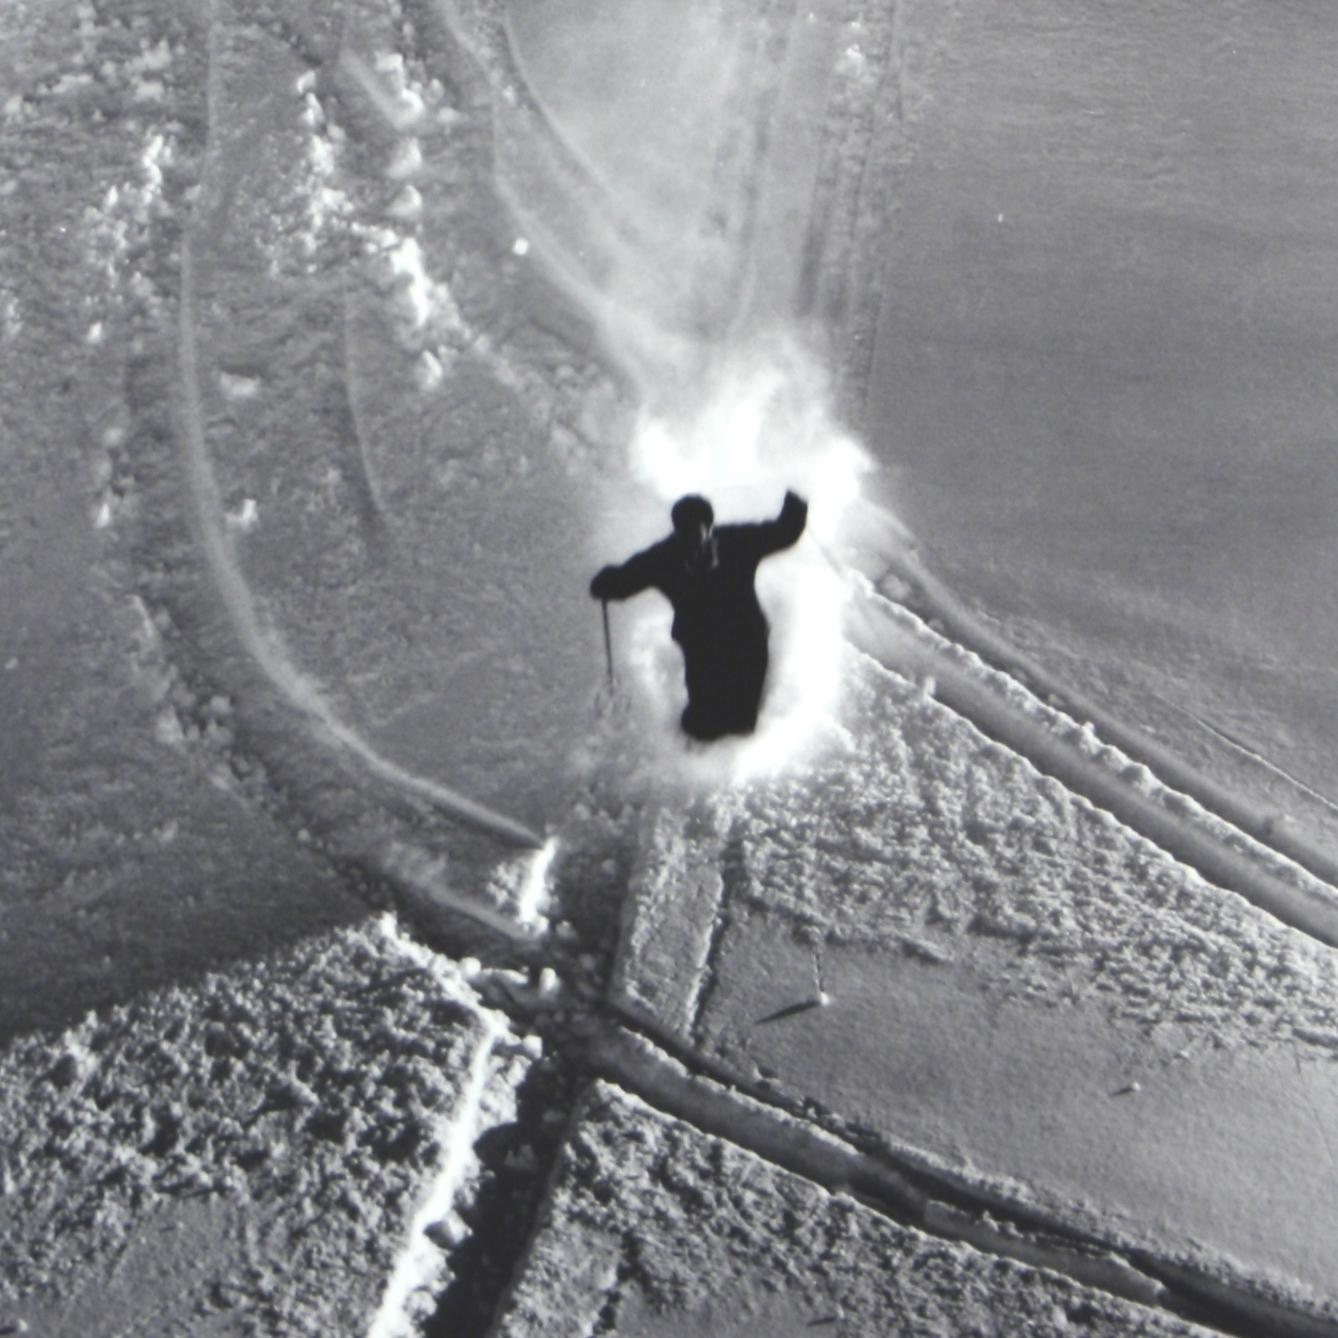 Alpine Ski photograph.
'SCHEIDEGG', a new mounted black and white photographic image after an original 1930s skiing photograph. Prior to being a recreational activity skiing was purely a means of travelling from A to B through the snow, it only